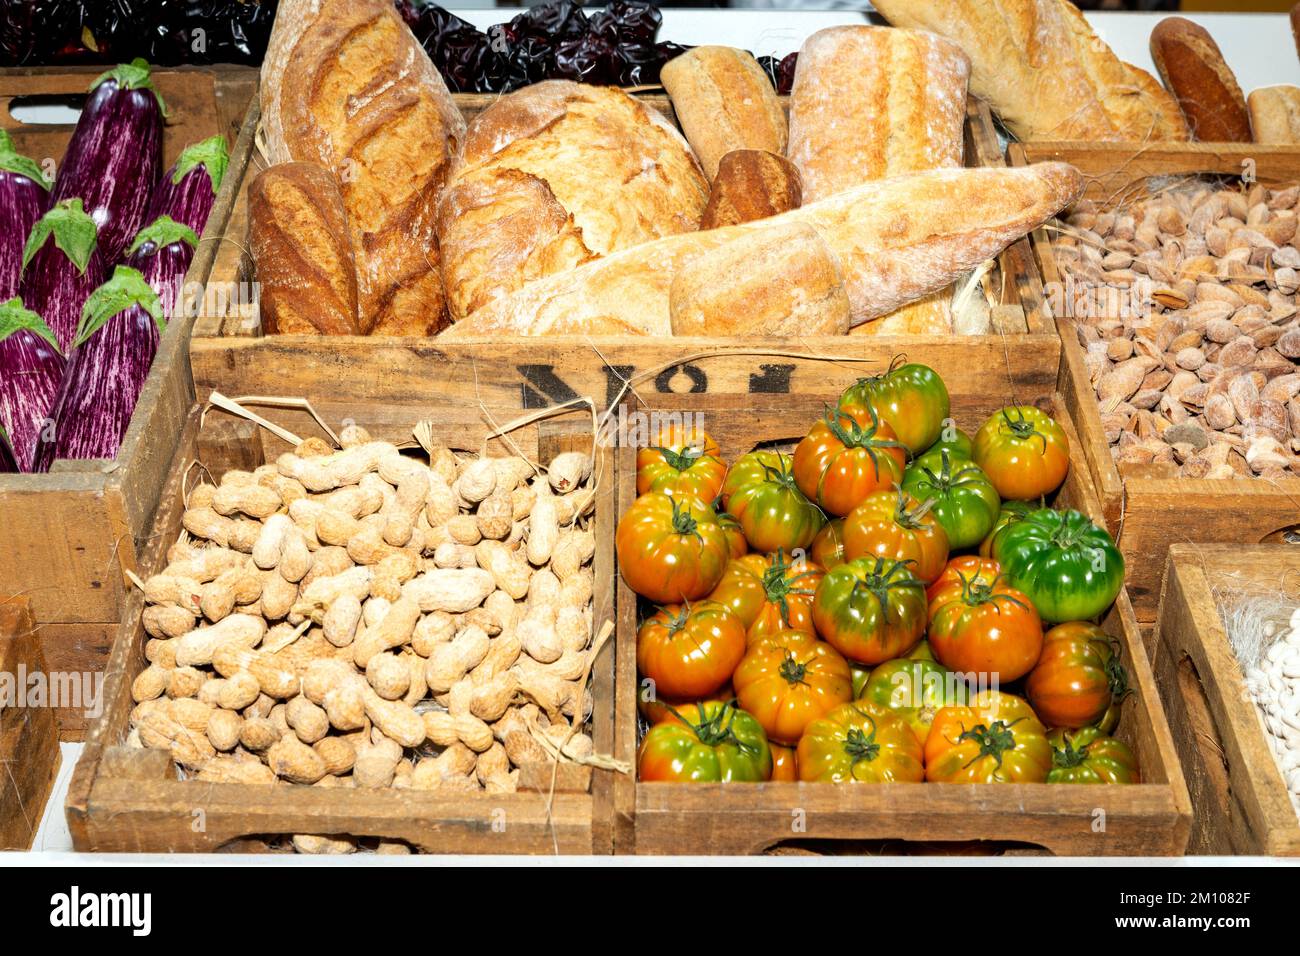 crates at the market with tomatoes, eggplants, peanuts, almonds and bread Stock Photo